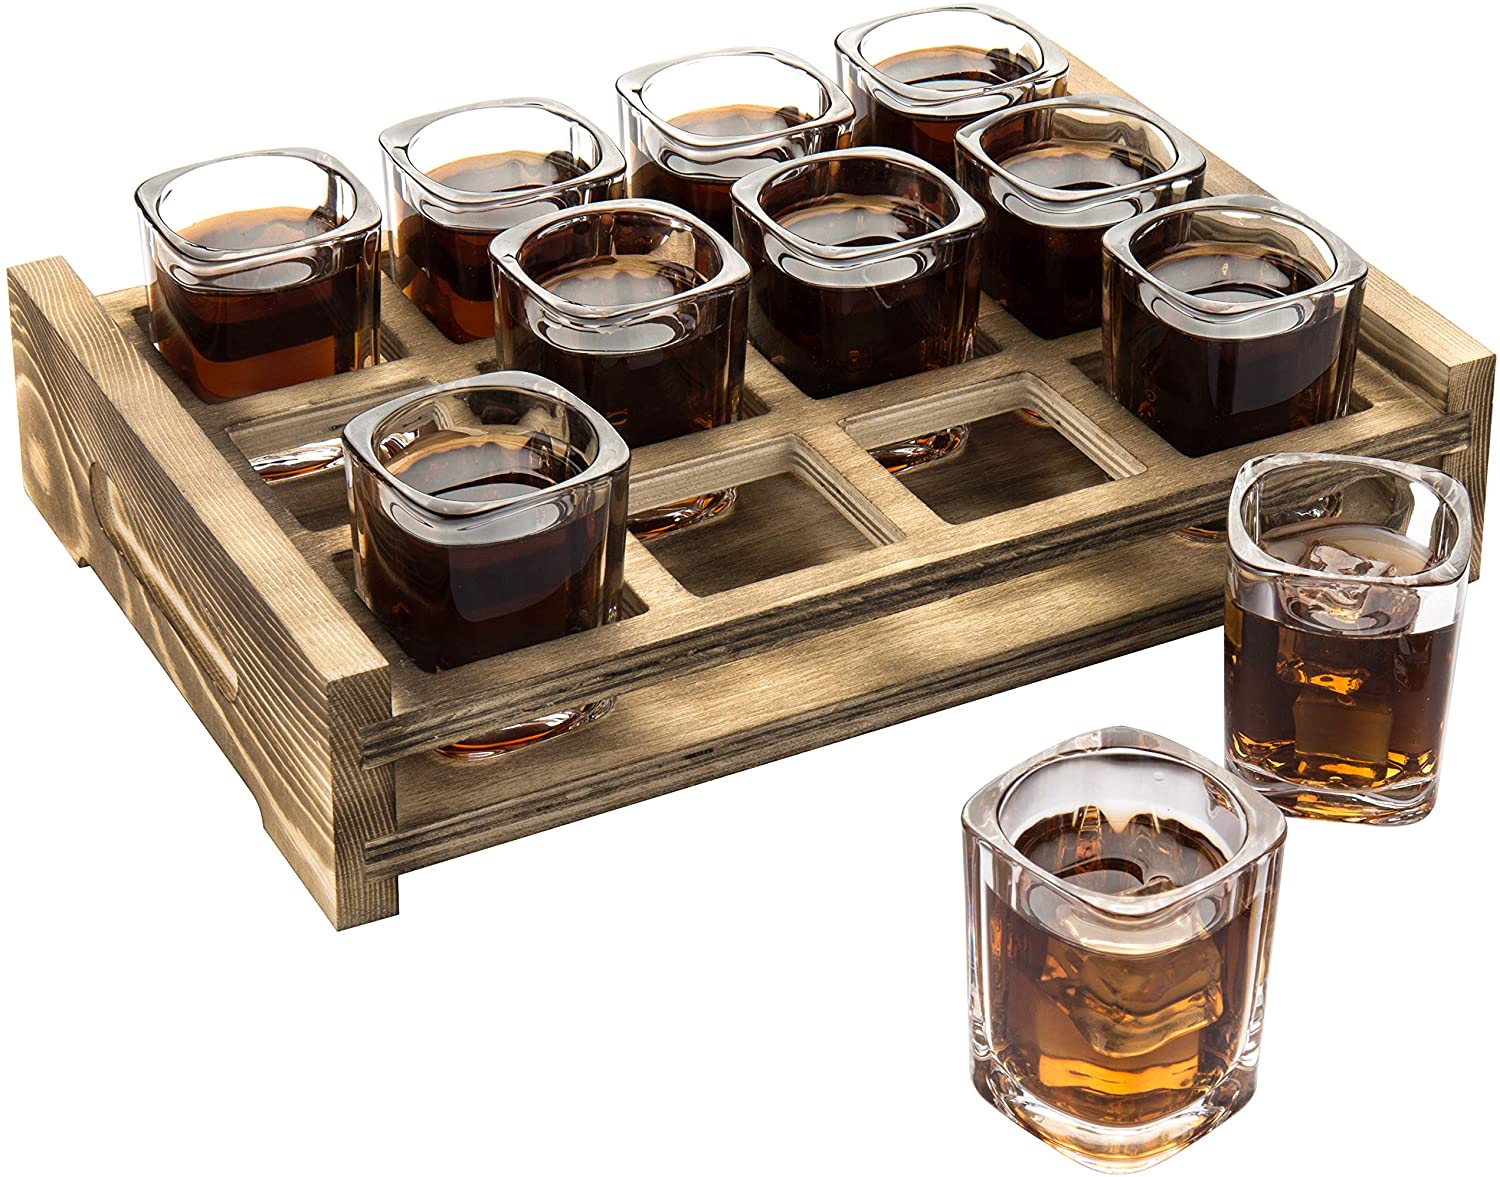 MyGift Rectangular Burnt Wood Tray with 12 Shot Glass, Brown - image 1 of 6